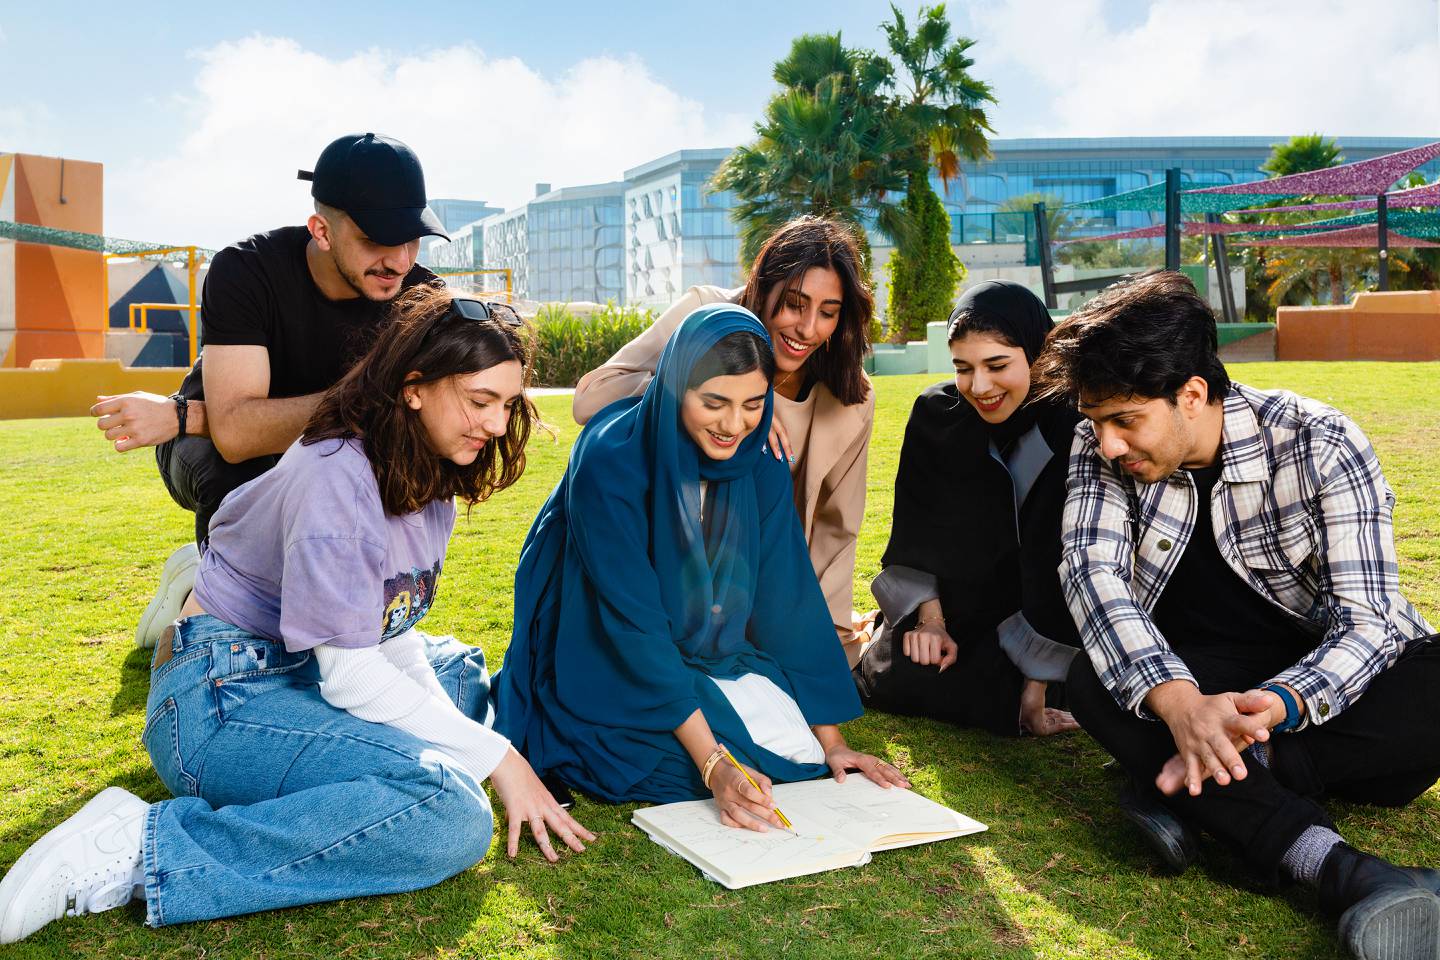 The Dubai Institute of Design and Innovation was founded in 2018. Photo: Dubai Institute of Design and Innovation